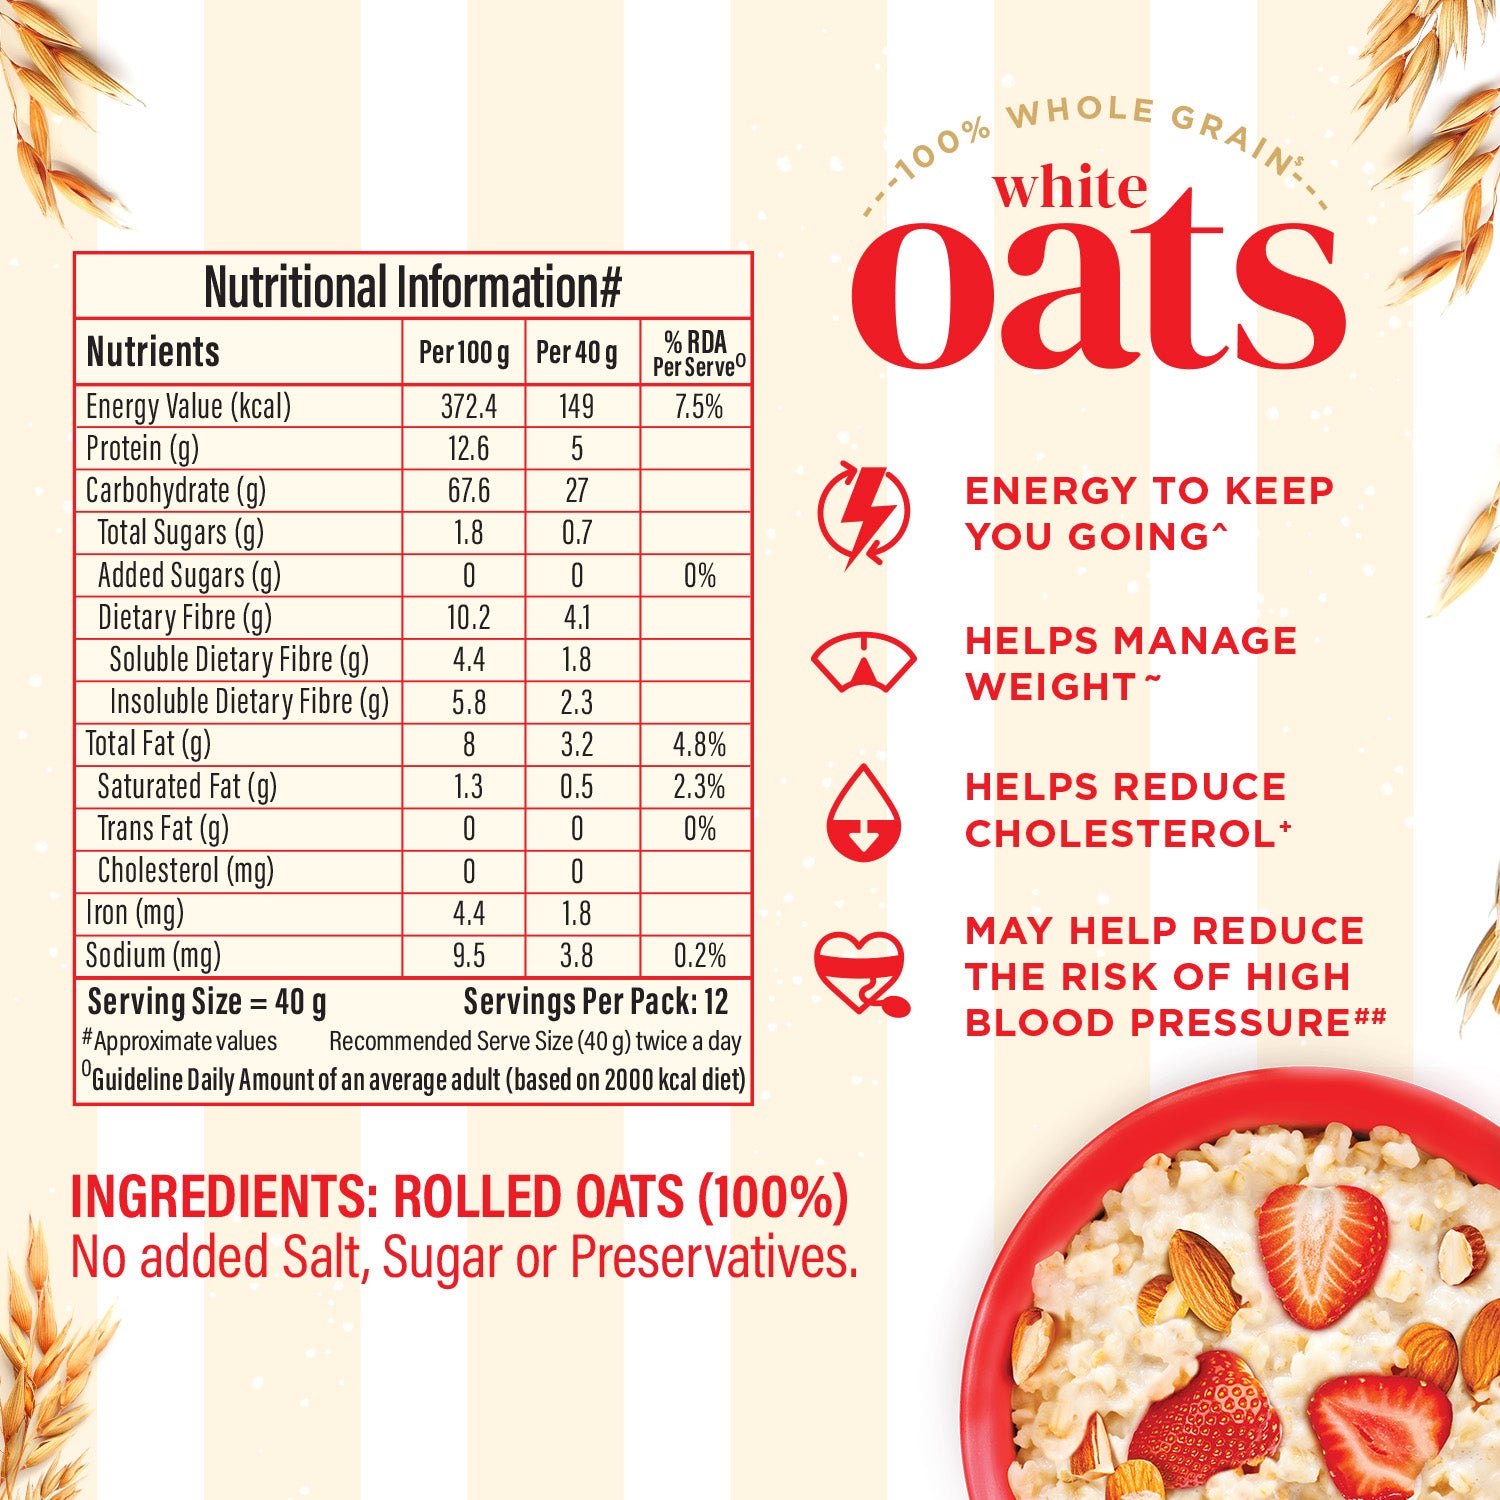 White Oats - Made from Premium Steel Cut Oats